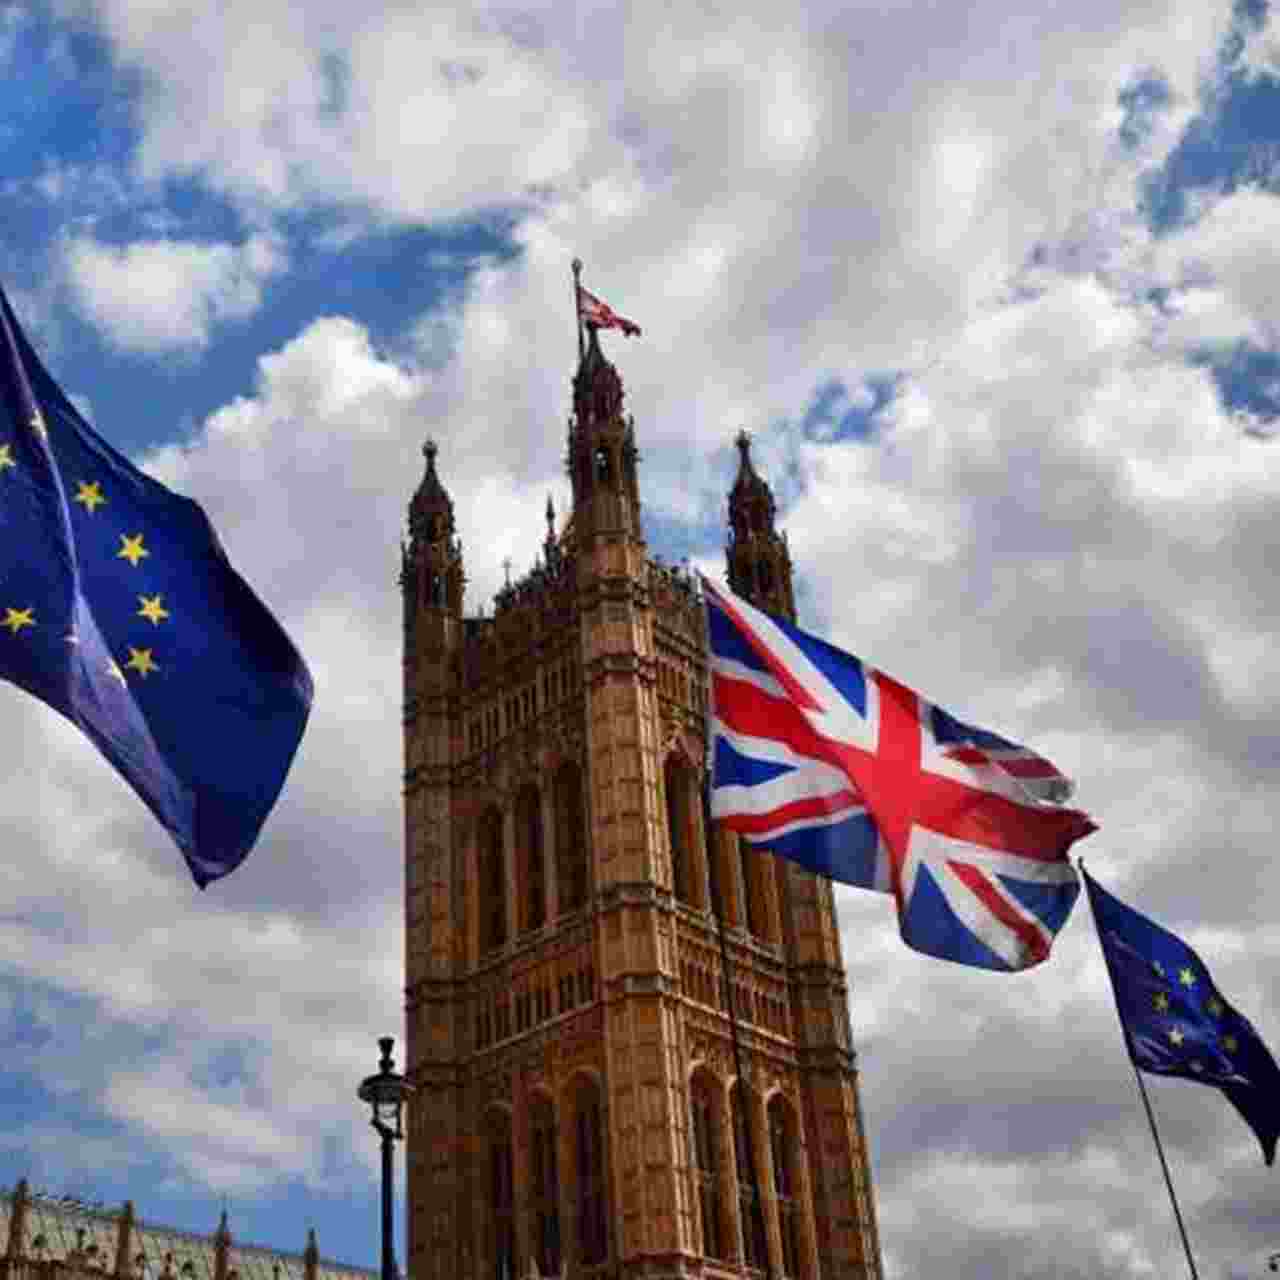 European Union and Union Jack flags flying in front of the Houses of Parliament in London